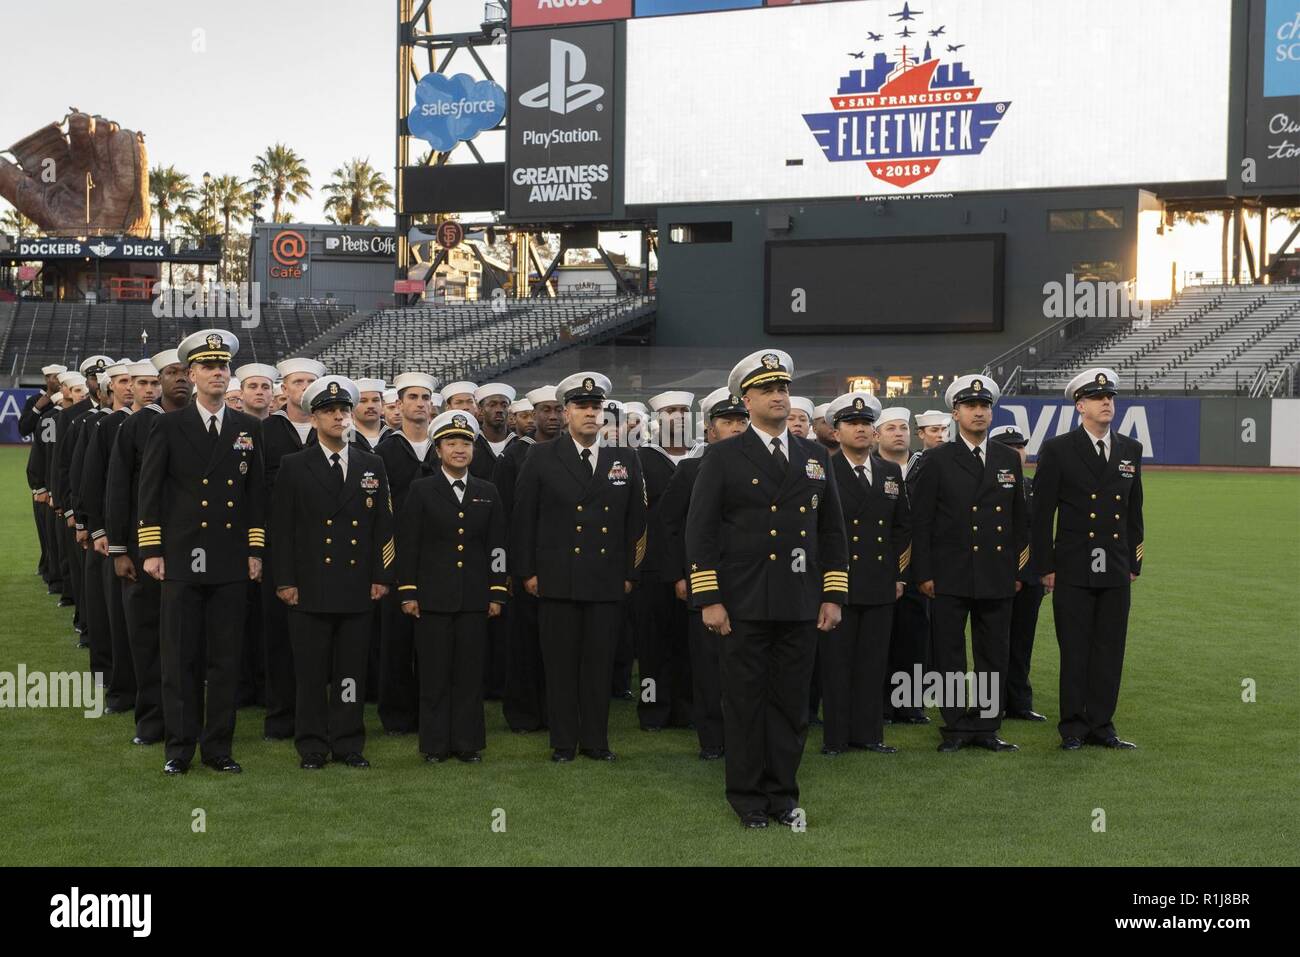 SAN FRANCISCO (Oct. 7, 2018) Sailors, assigned to the amphibious assault ship USS Bonhomme Richard (LHD 6), pose for a group photo at the AT&T Park stadium during San Francisco Fleet Week 2018. San Francisco Fleet Week is an opportunity for the American public to meet their Navy, Marine Corps and Coast Guard teams and experience America’s sea services. During fleet week, service members participate in various community service events, showcase capabilities and equipment to the community, and enjoy the hospitality of San Francisco and its surrounding areas. Stock Photo